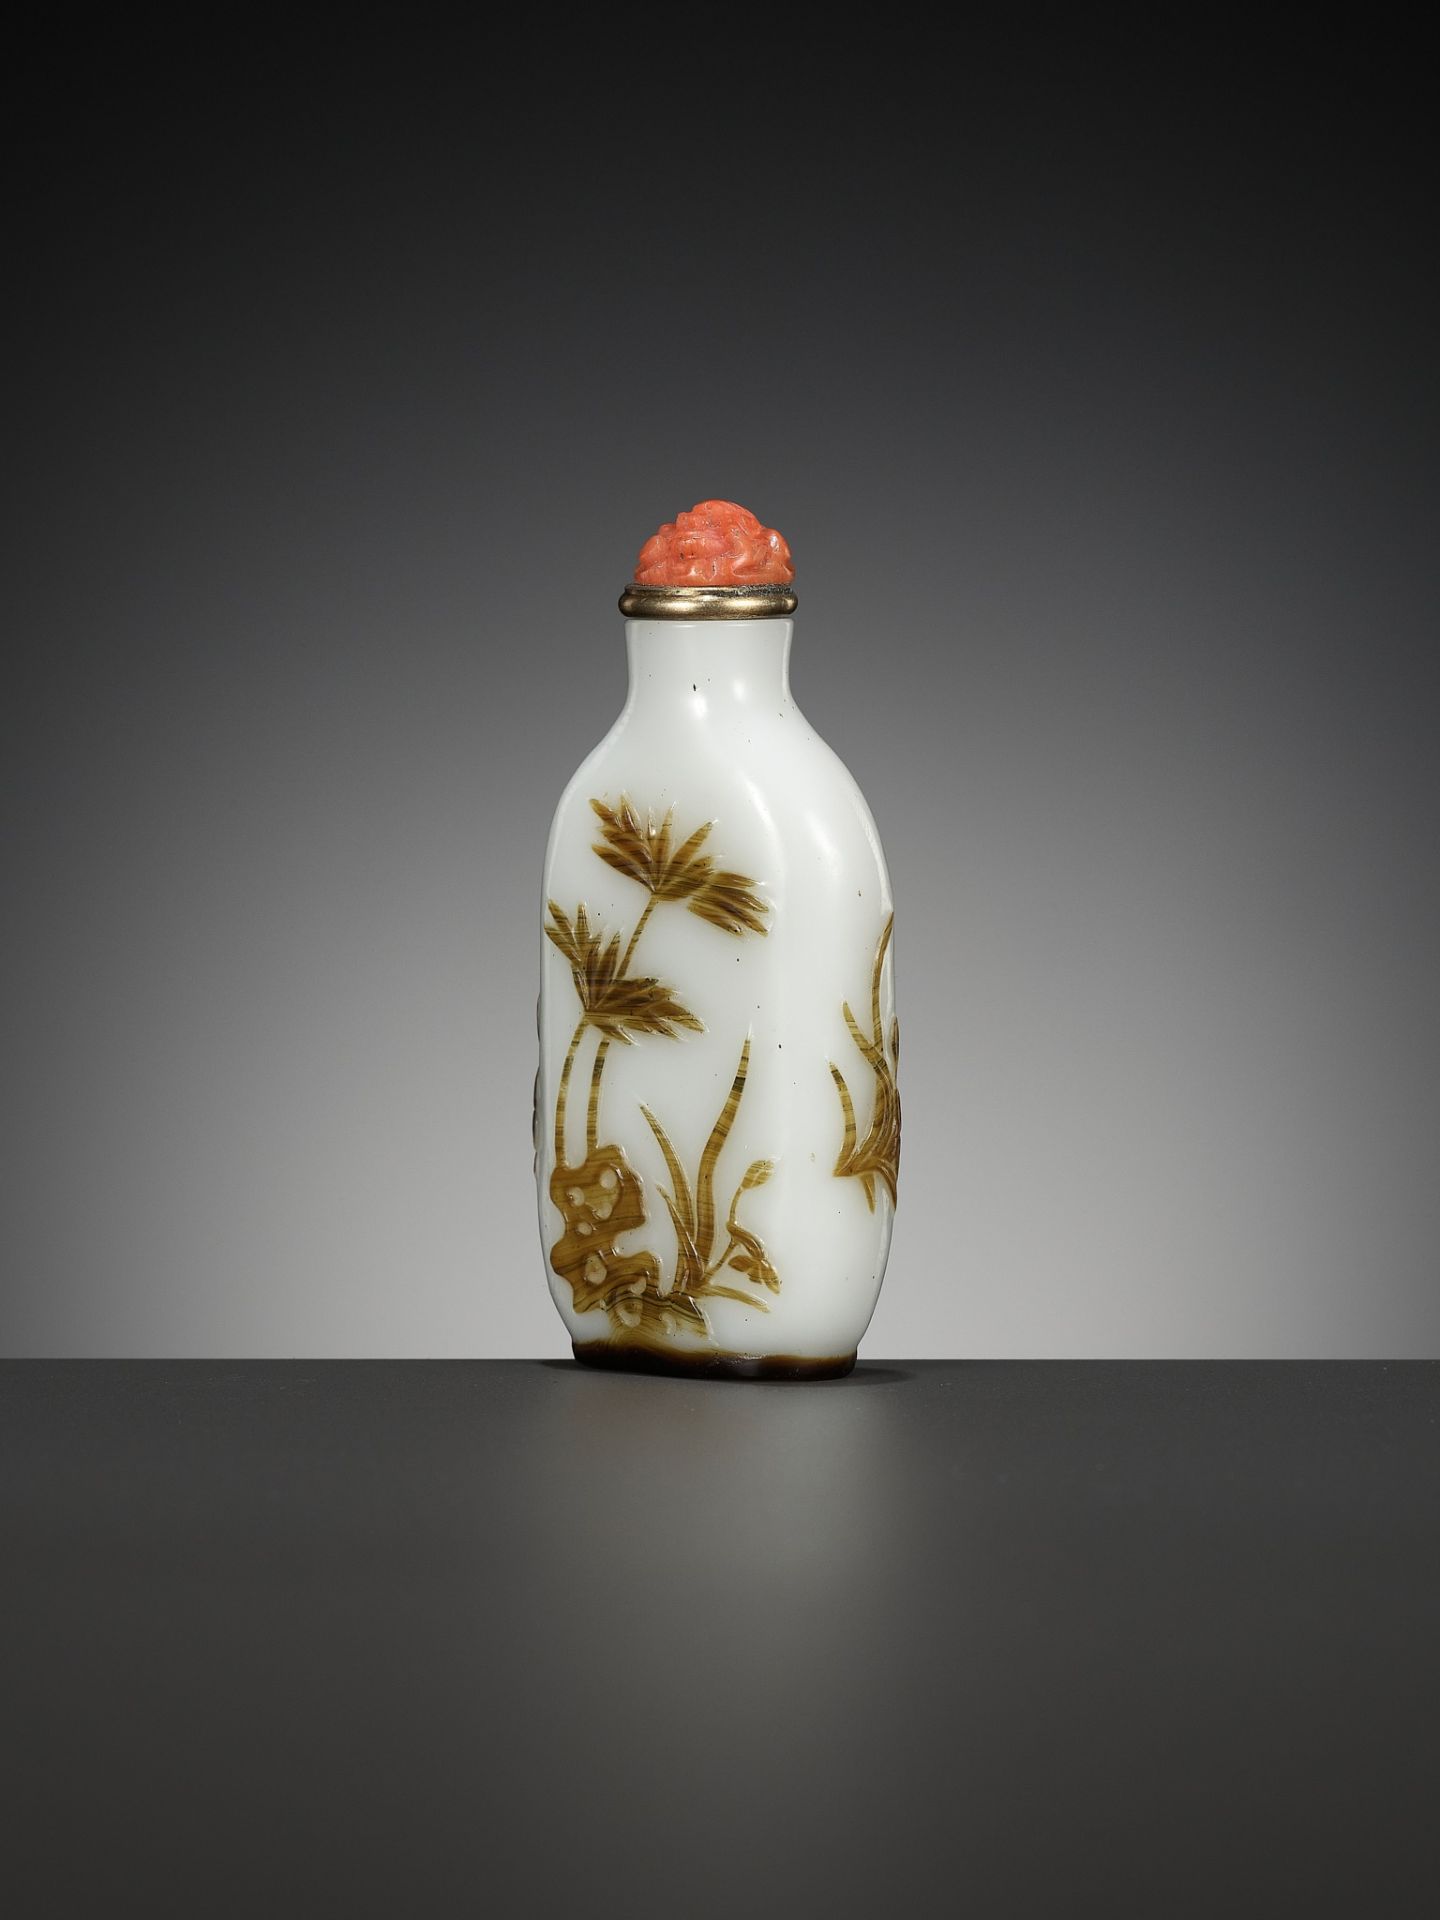 AN INSCRIBED OVERLAY GLASS ‘CAT AND BUTTERFLY’ SNUFF BOTTLE, BY WANG SU, YANGZHOU SCHOOL, 1820-1840 - Image 13 of 19